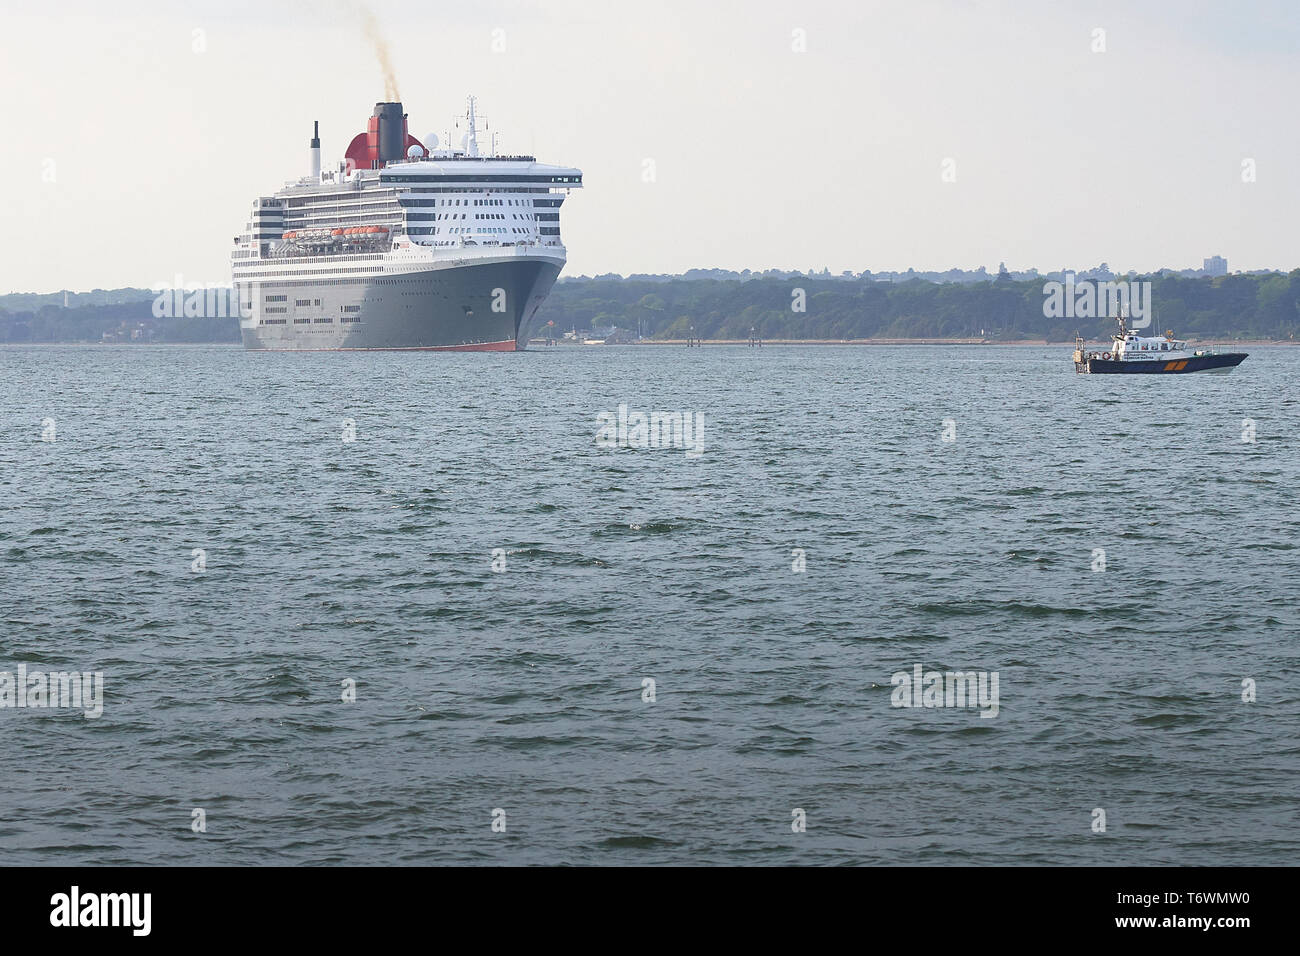 The Cunard Line Flagship, RMS QUEEN MARY 2, Steaming Out Of Southampton Water, UK. Bound For New York, 28 April 2019. Stock Photo